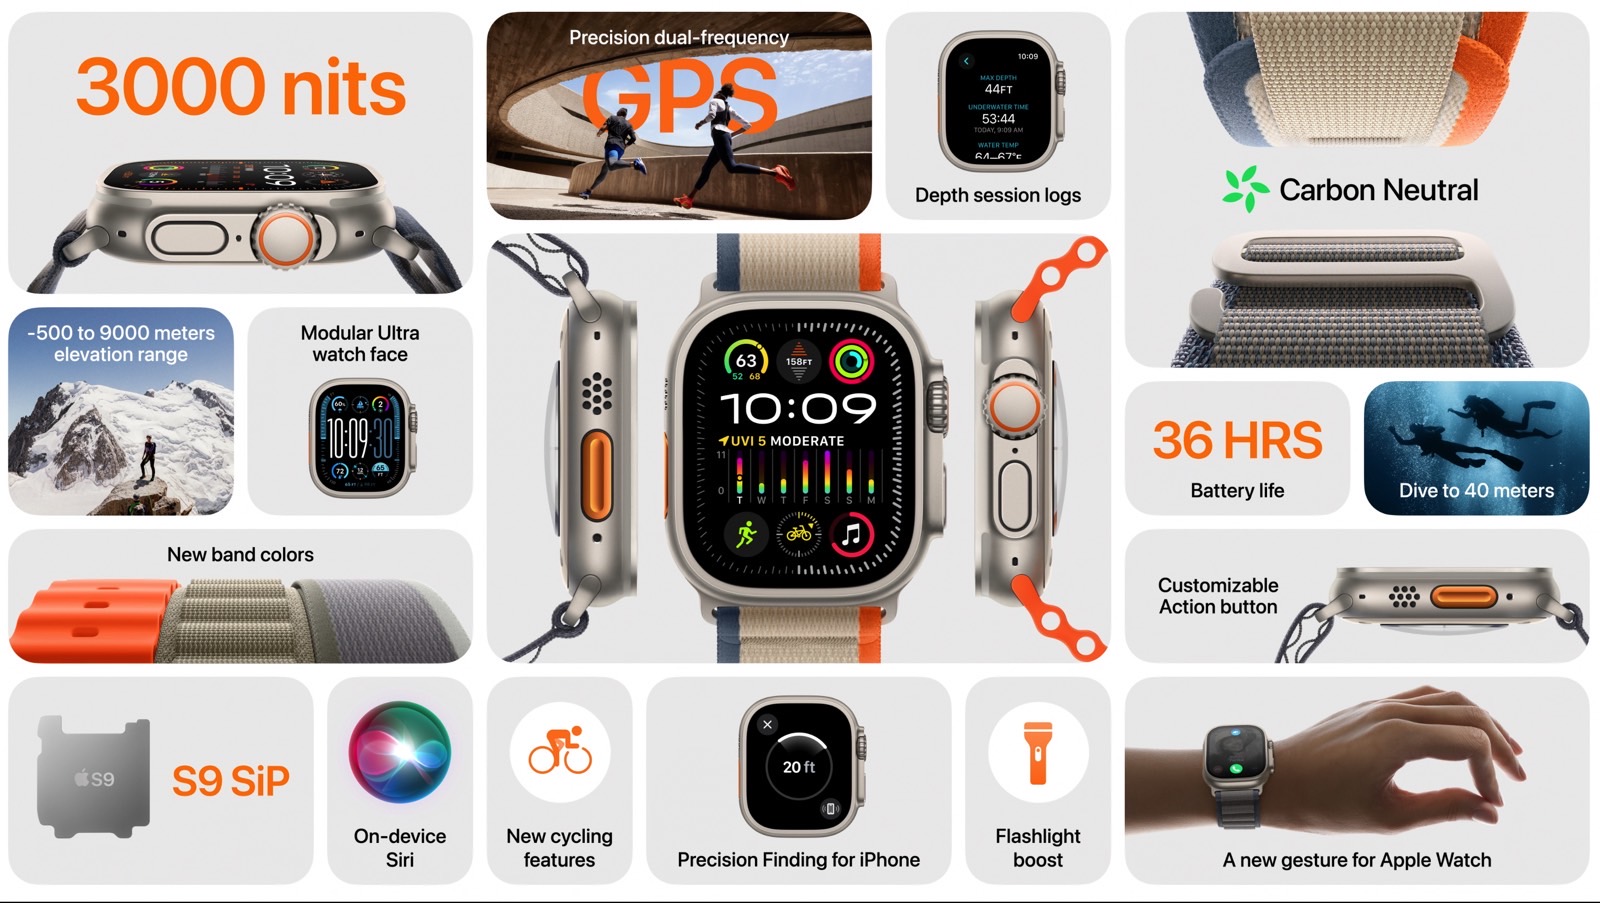 Apple Watch Ultra 2 features: Carbon neutrality is a highlight.